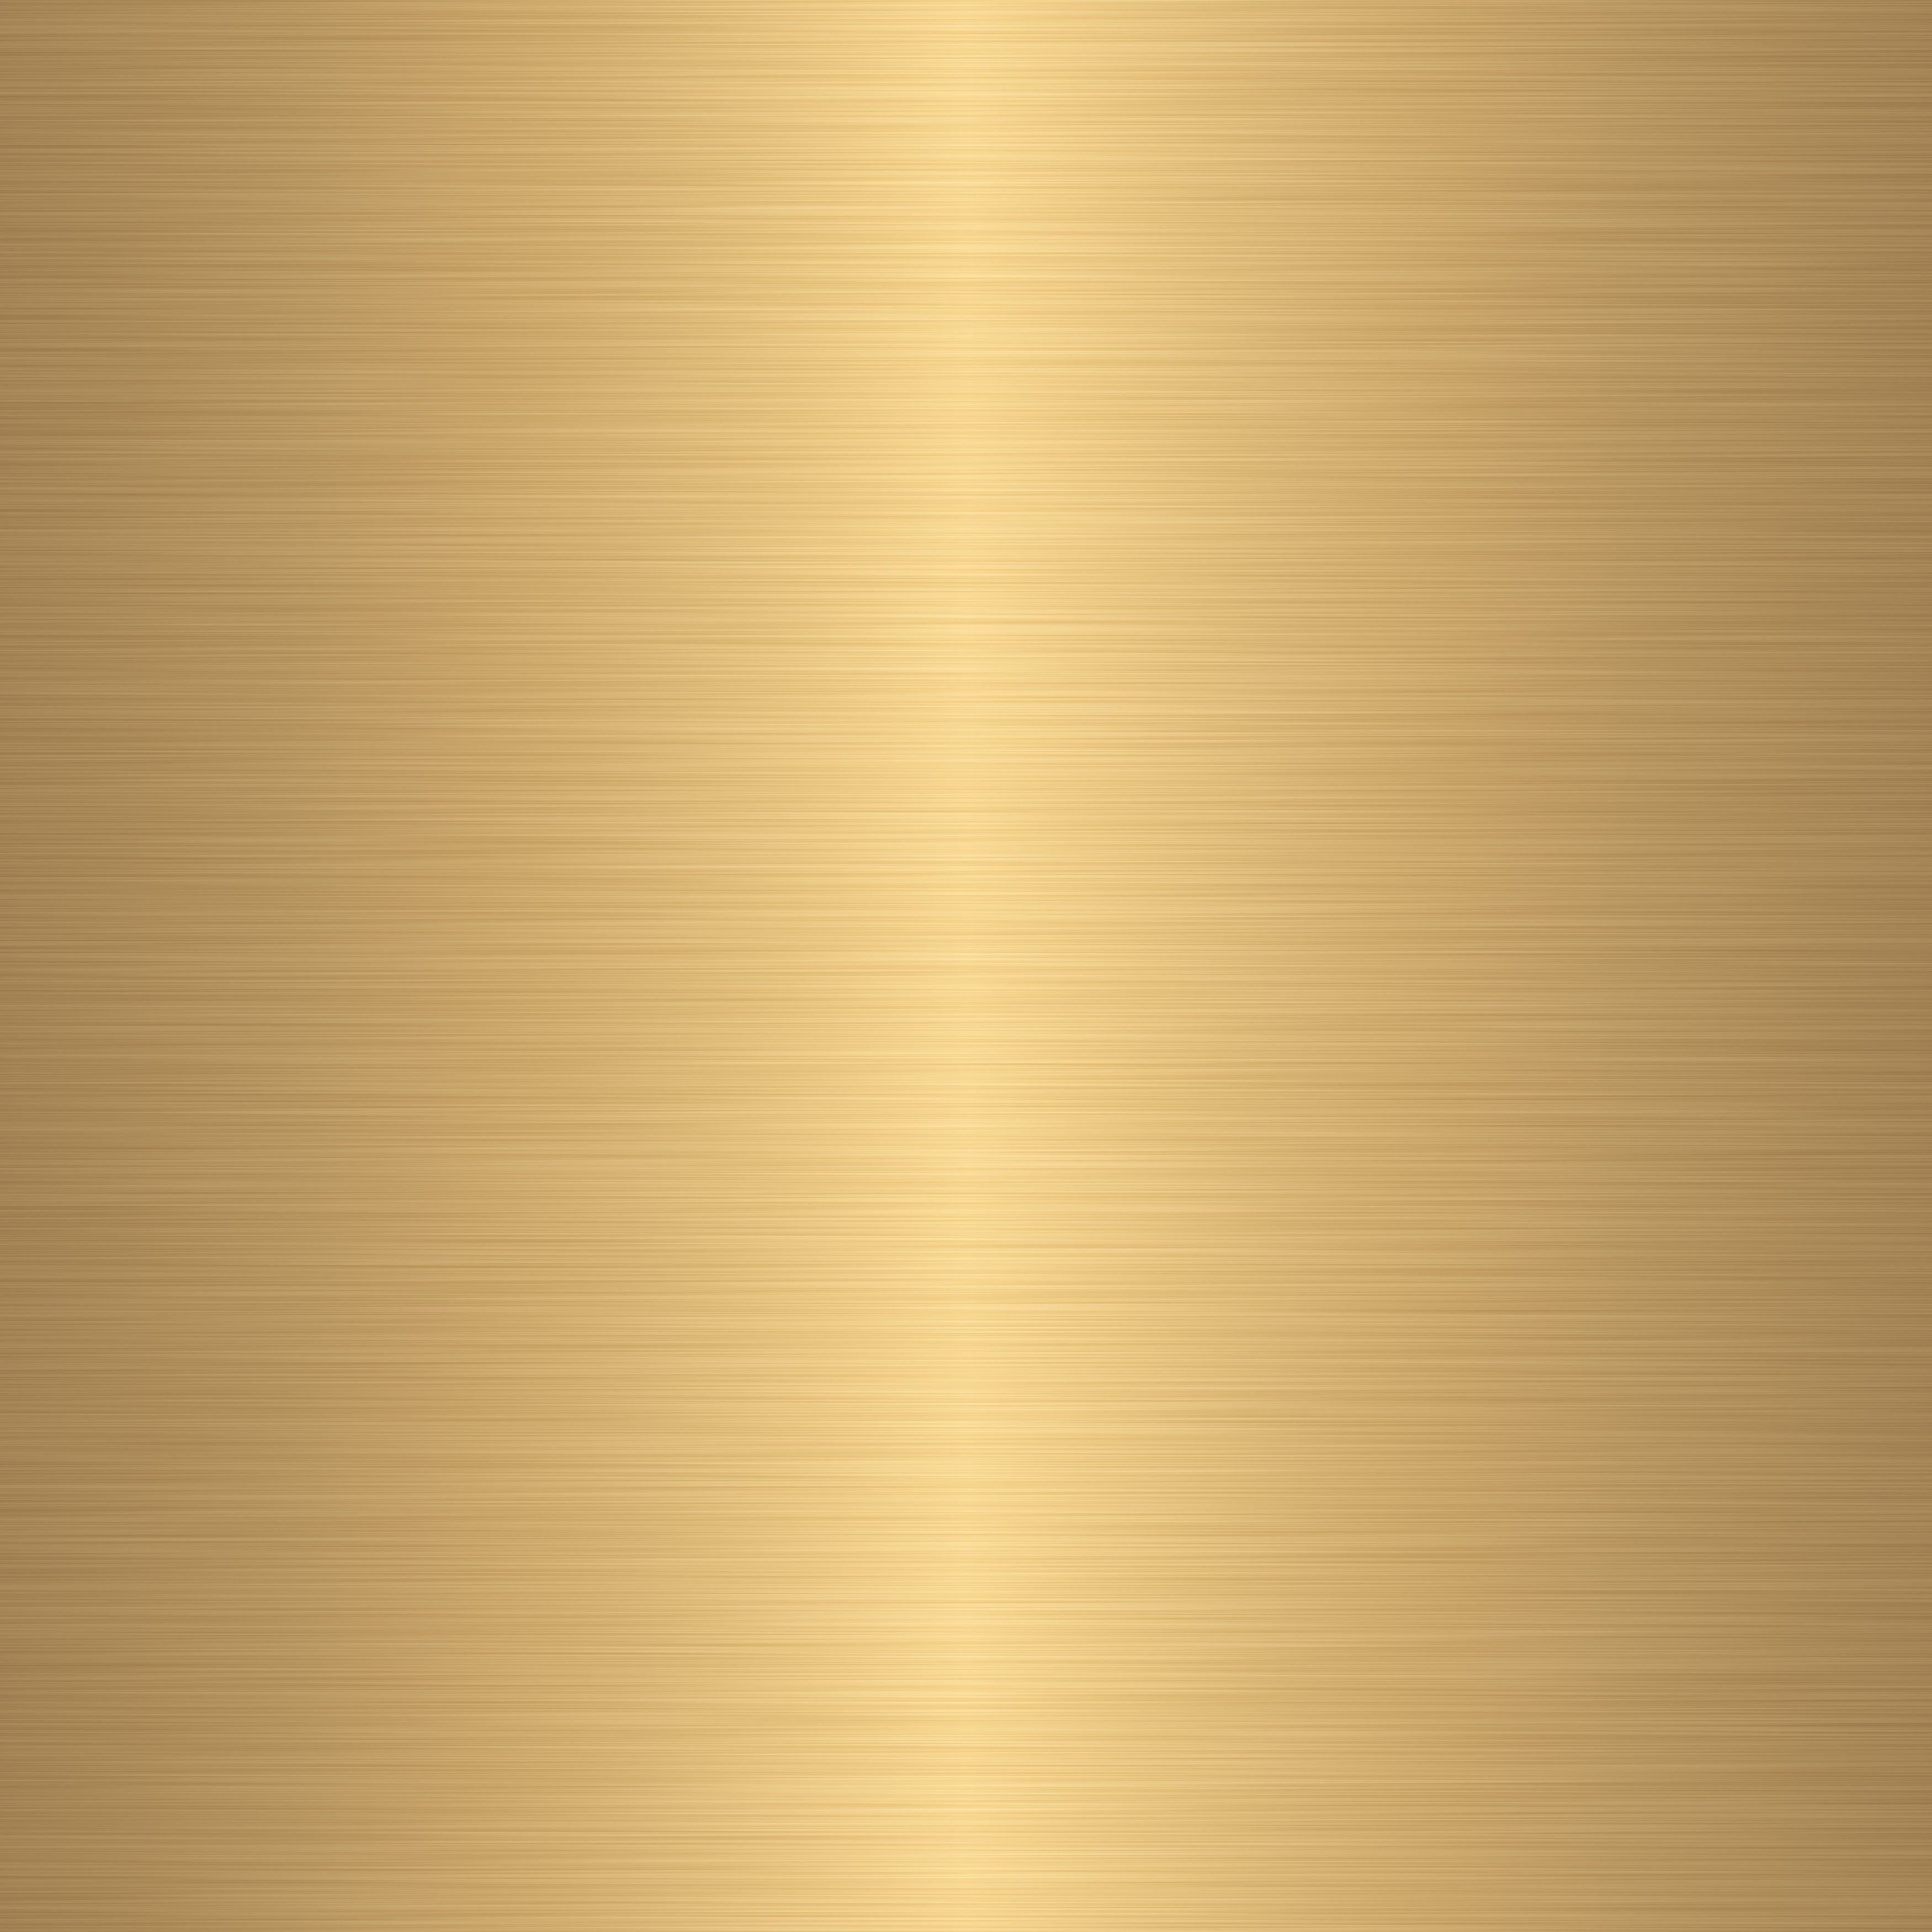 Brushed Gold Texture